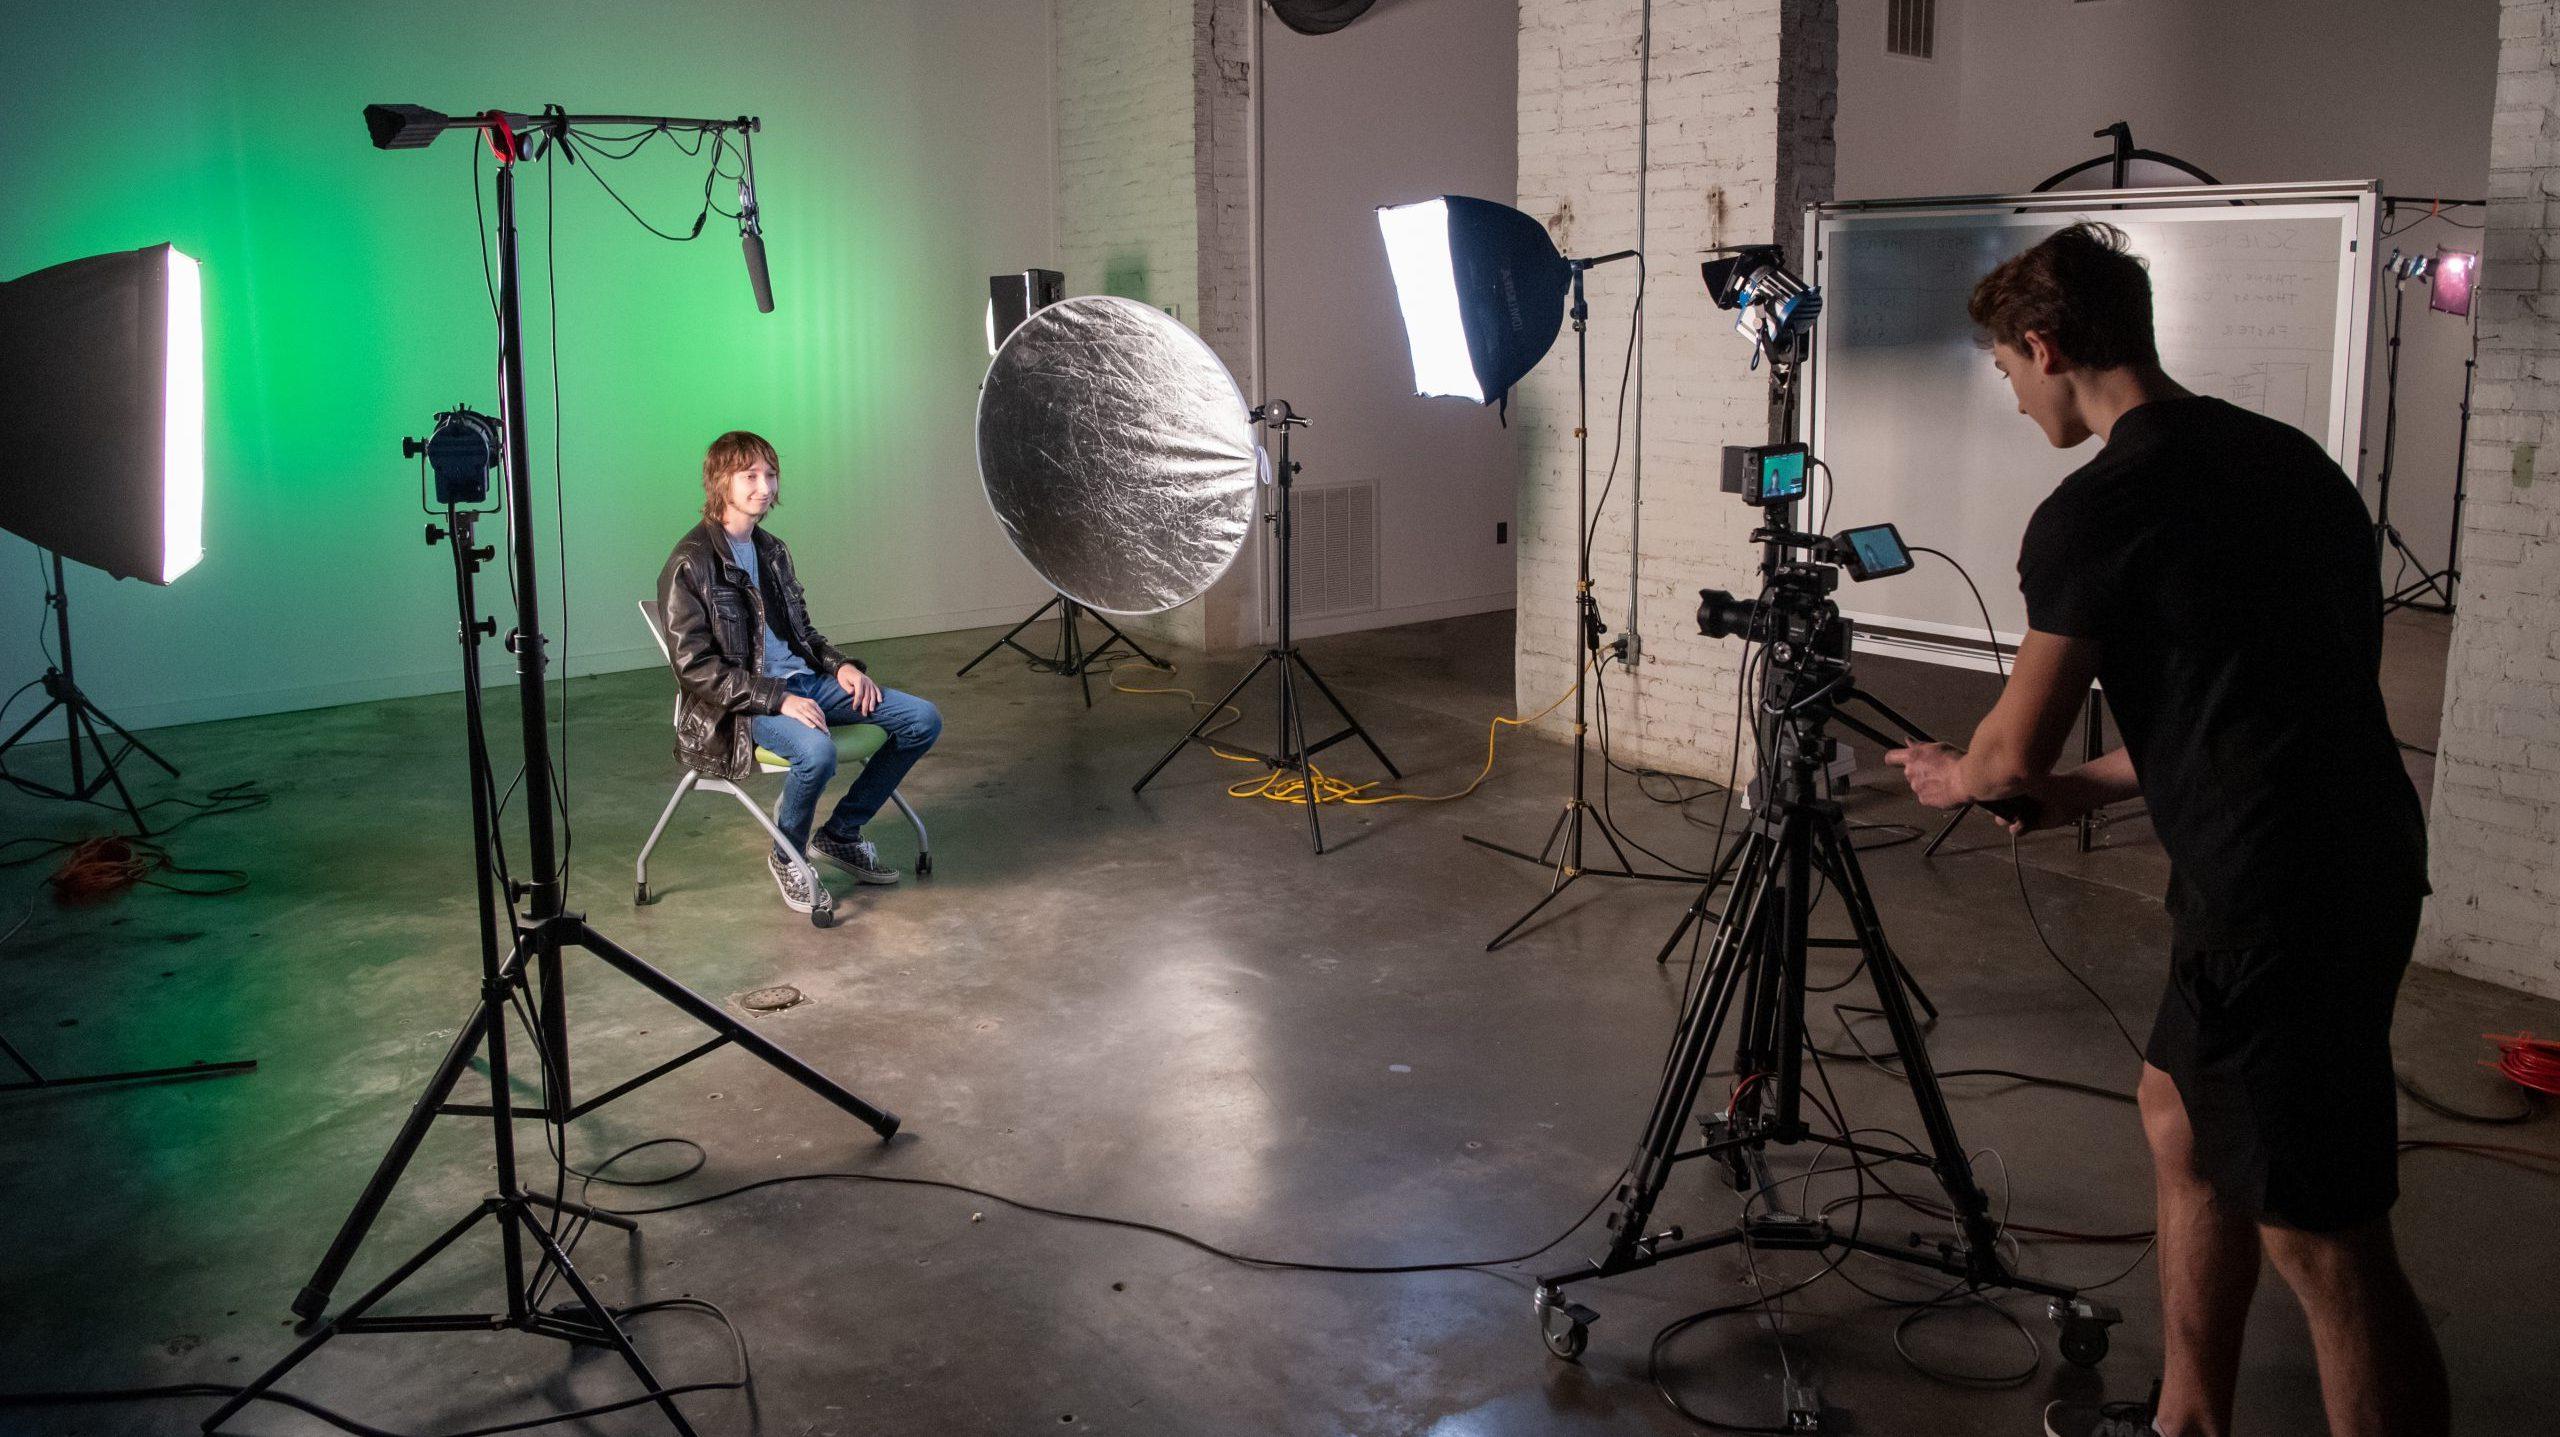 Student sitting in a chair with video equipment and lighting placed around him, while another student operates a camera on a tripod.